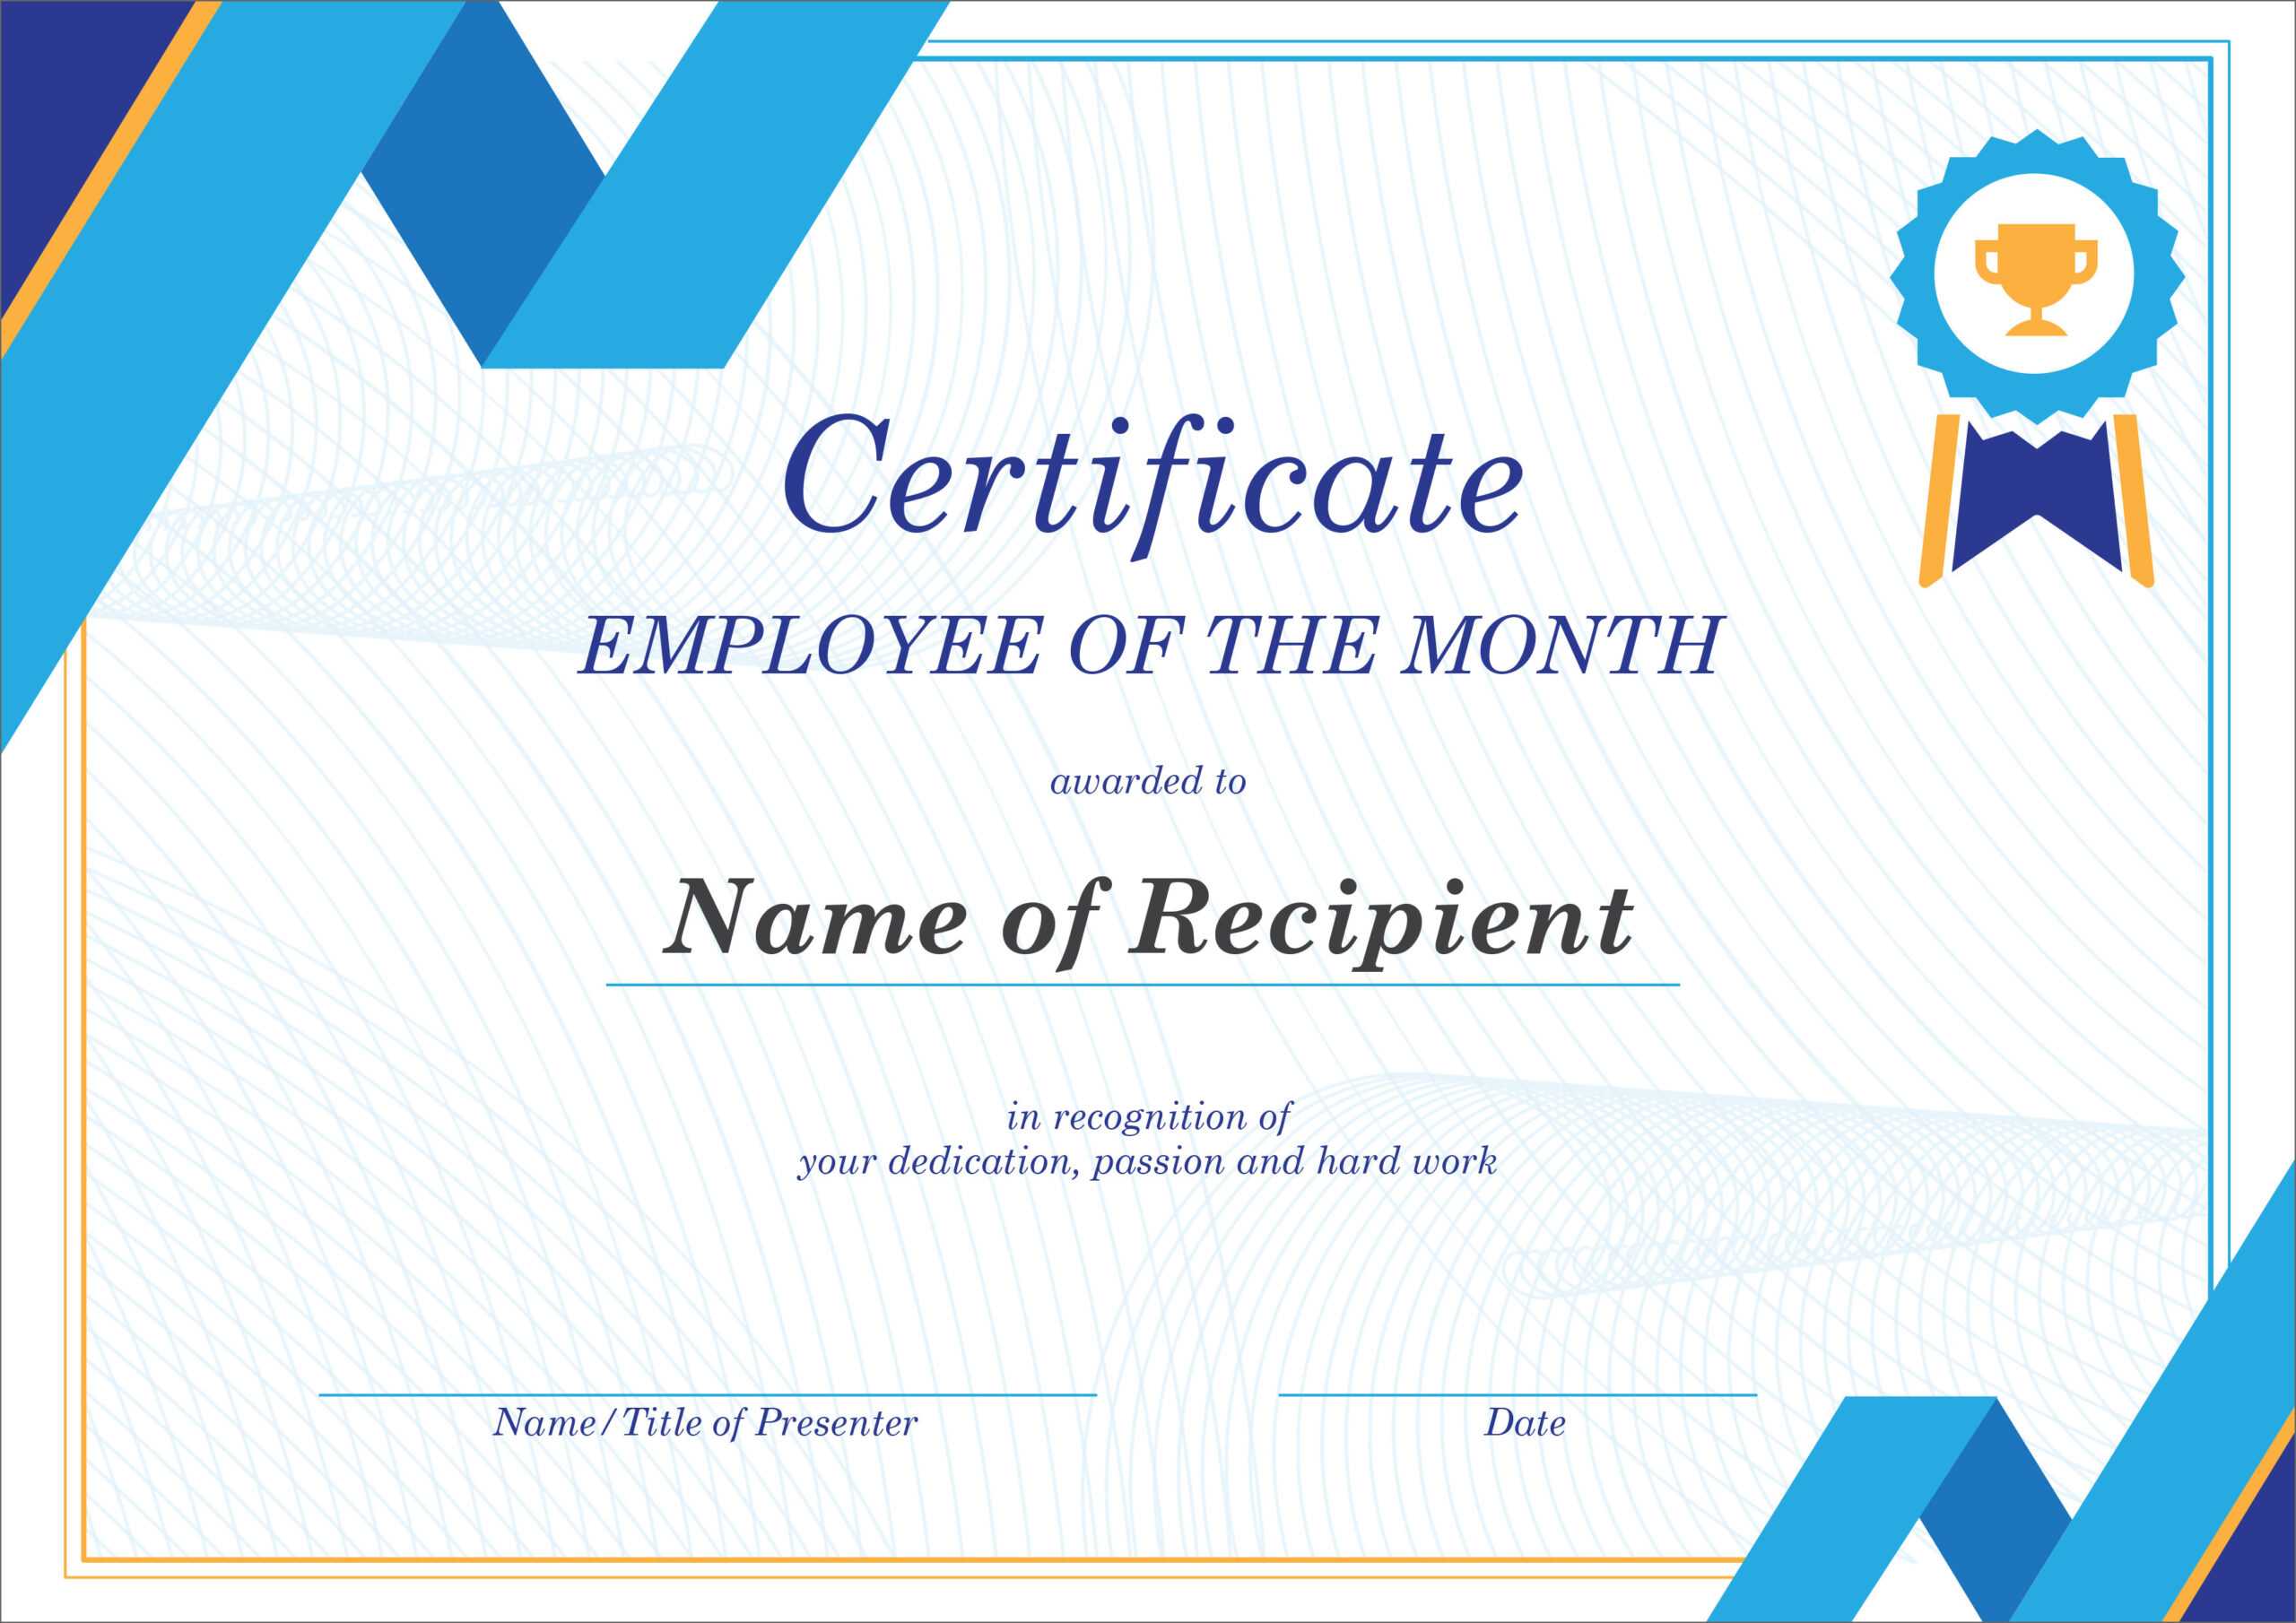 50 Free Creative Blank Certificate Templates In Psd Pertaining To Best Employee Award Certificate Templates